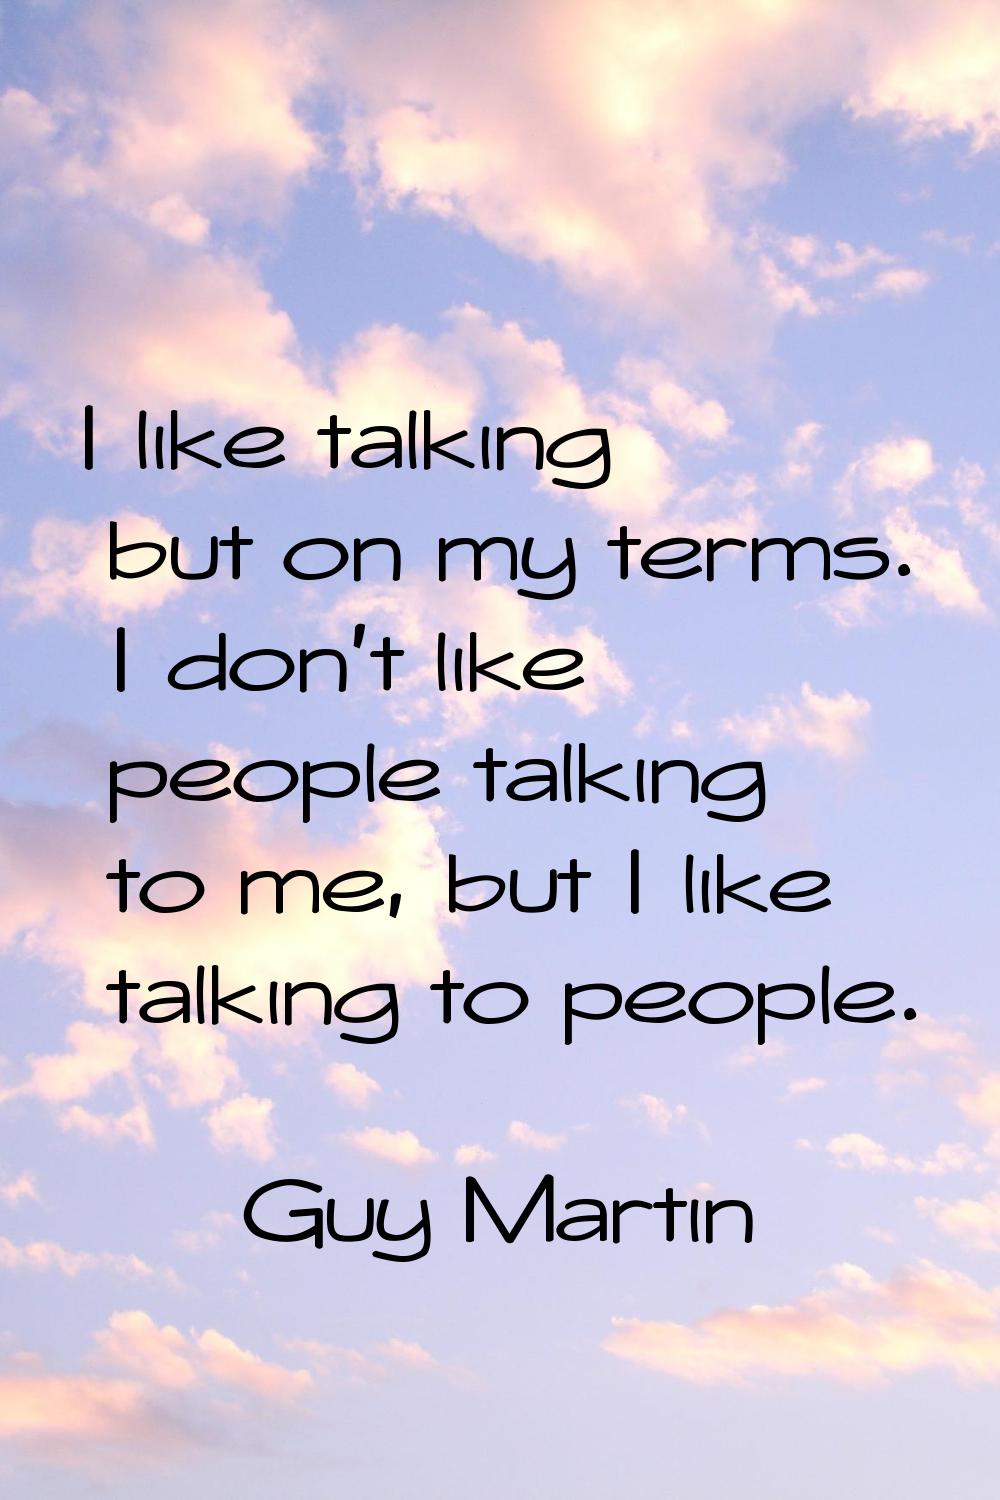 I like talking but on my terms. I don't like people talking to me, but I like talking to people.